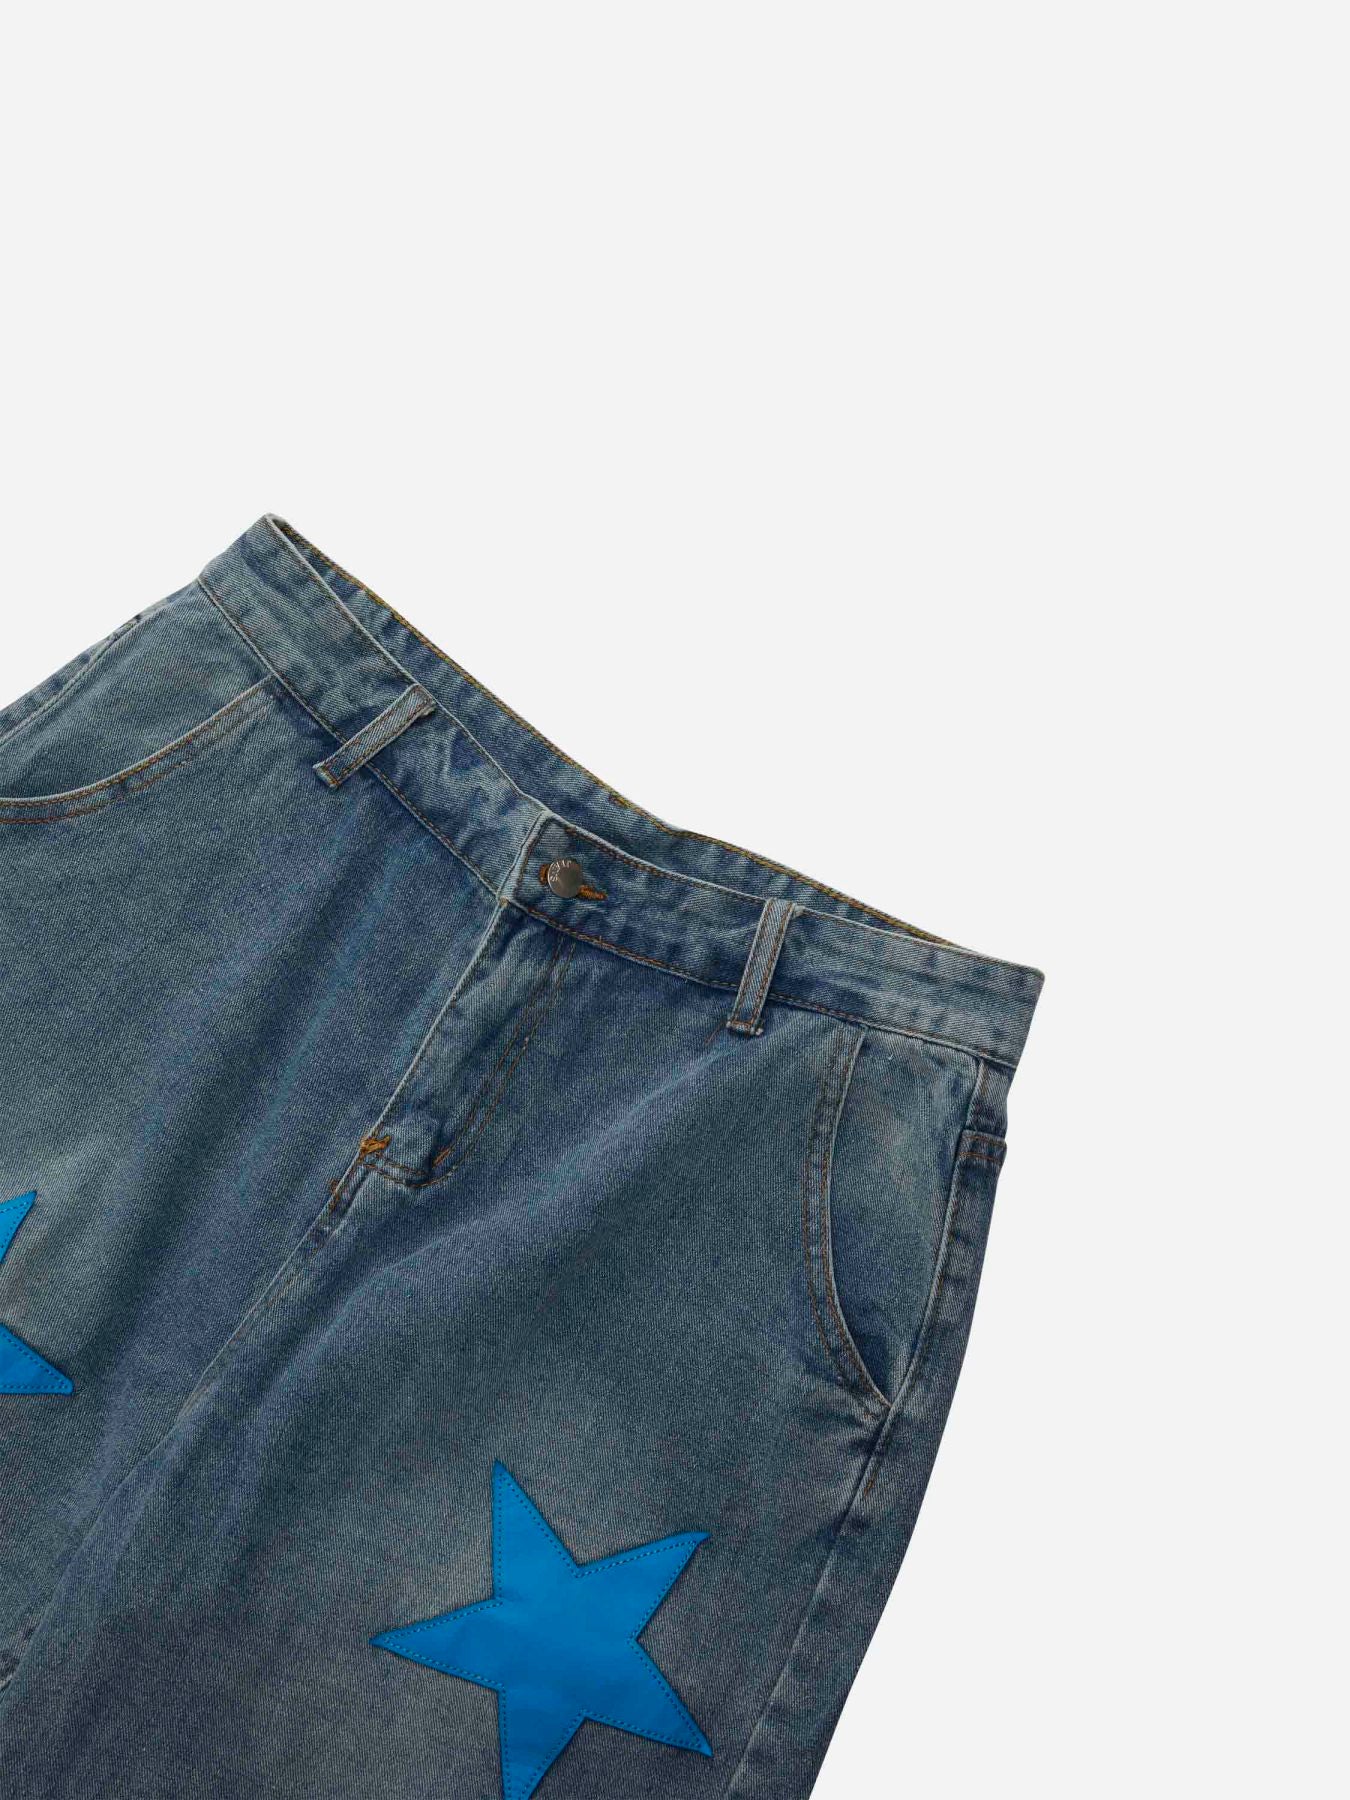 Thesupermade Star Embroidered Denim Shorts